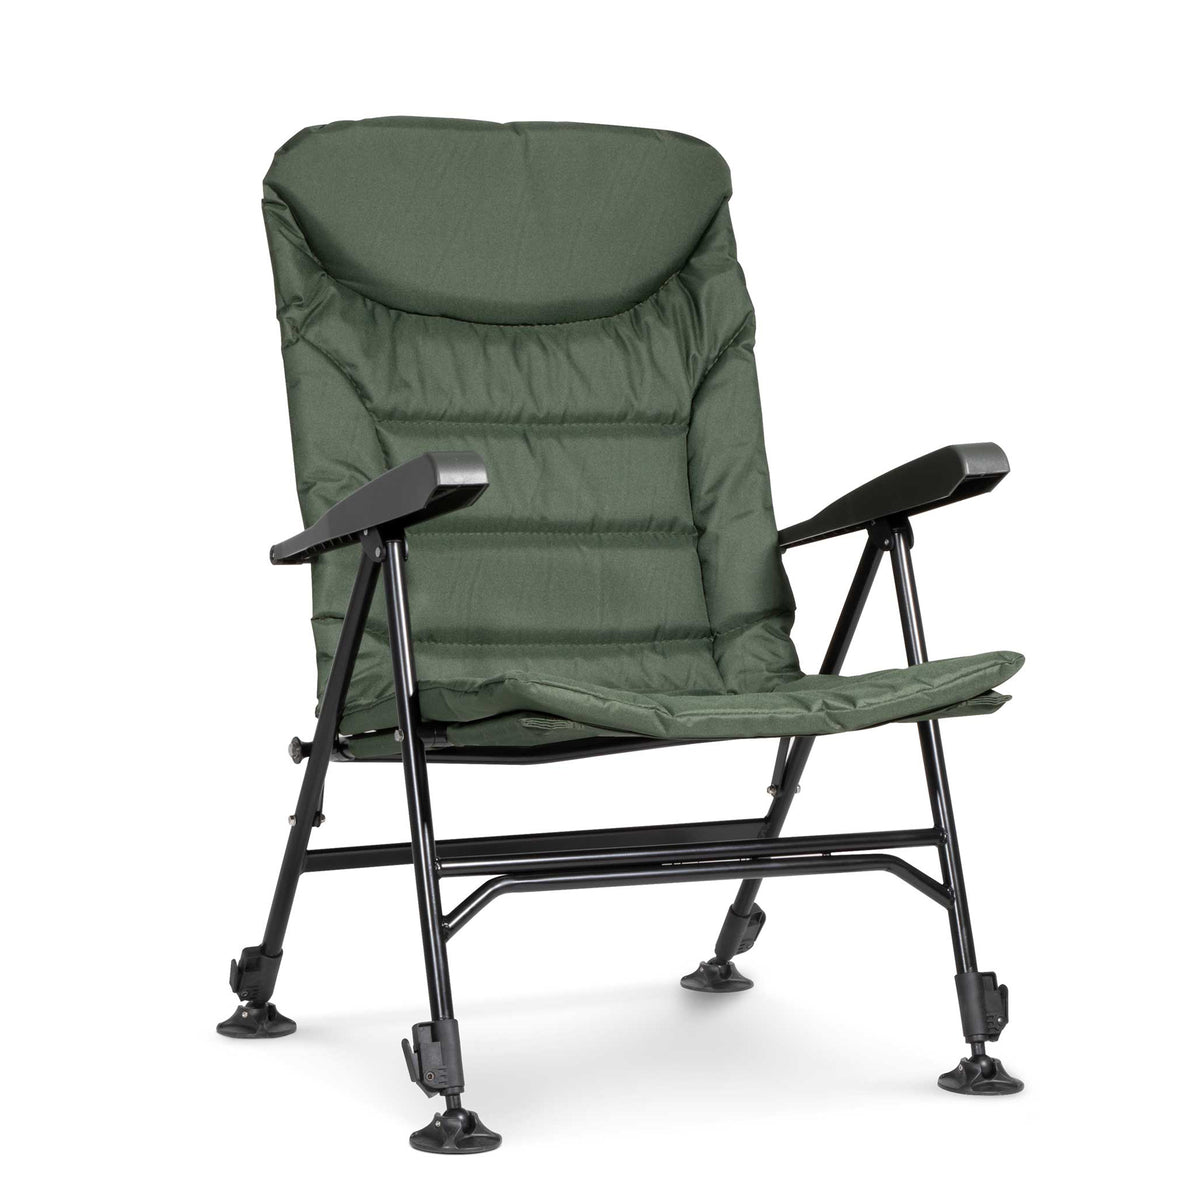 Portable Fishing/Camping Chair, Reclining, Adjustable, Water